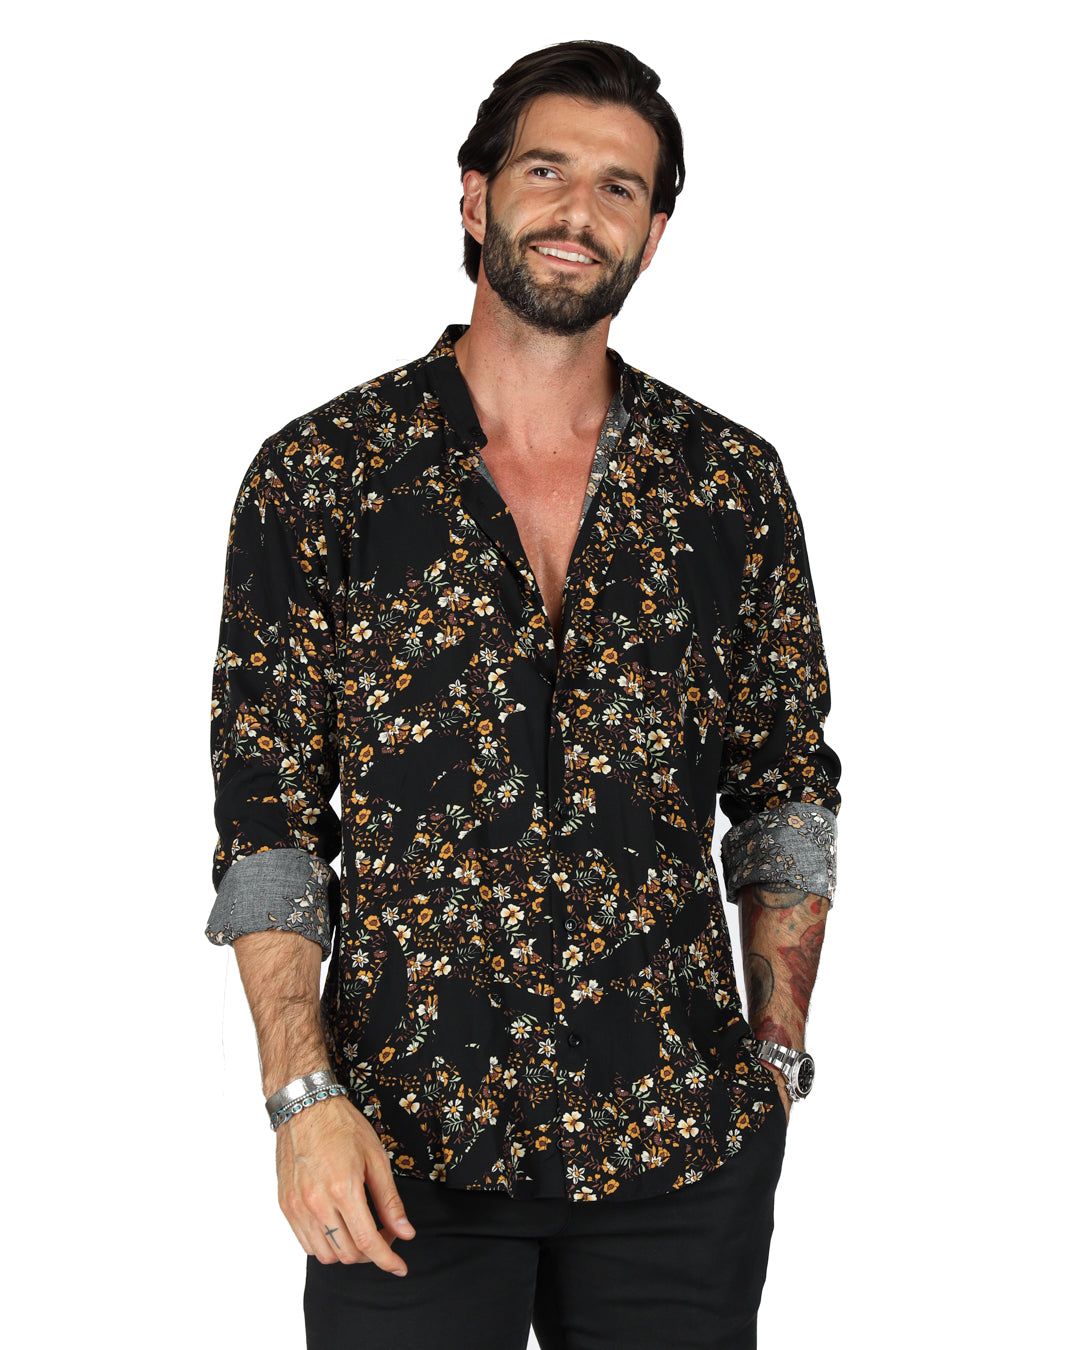 Curacao - Brown floral patterned Korean shirt